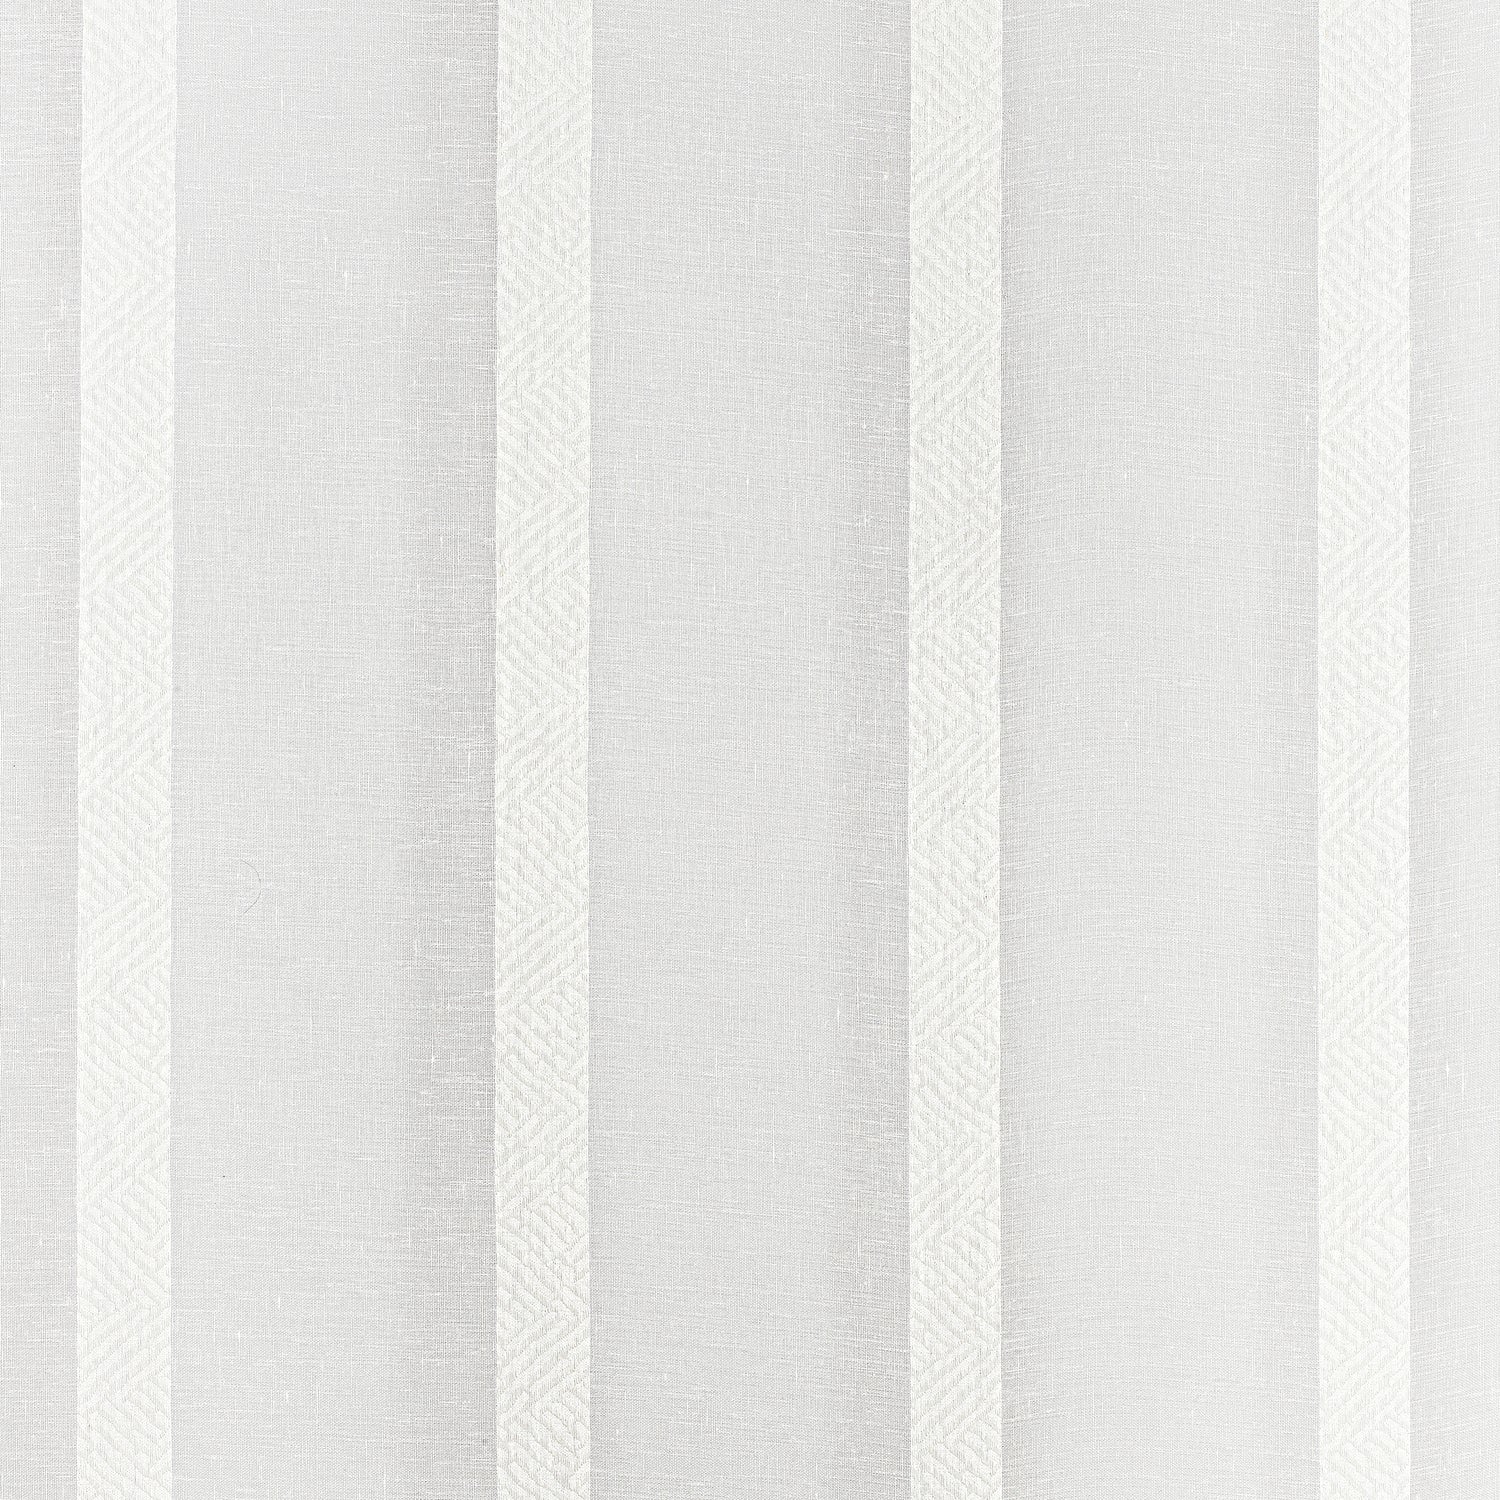 Cobble Hill Stripe fabric in ivory color - pattern number FWW7123 - by Thibaut in the Atmosphere collection